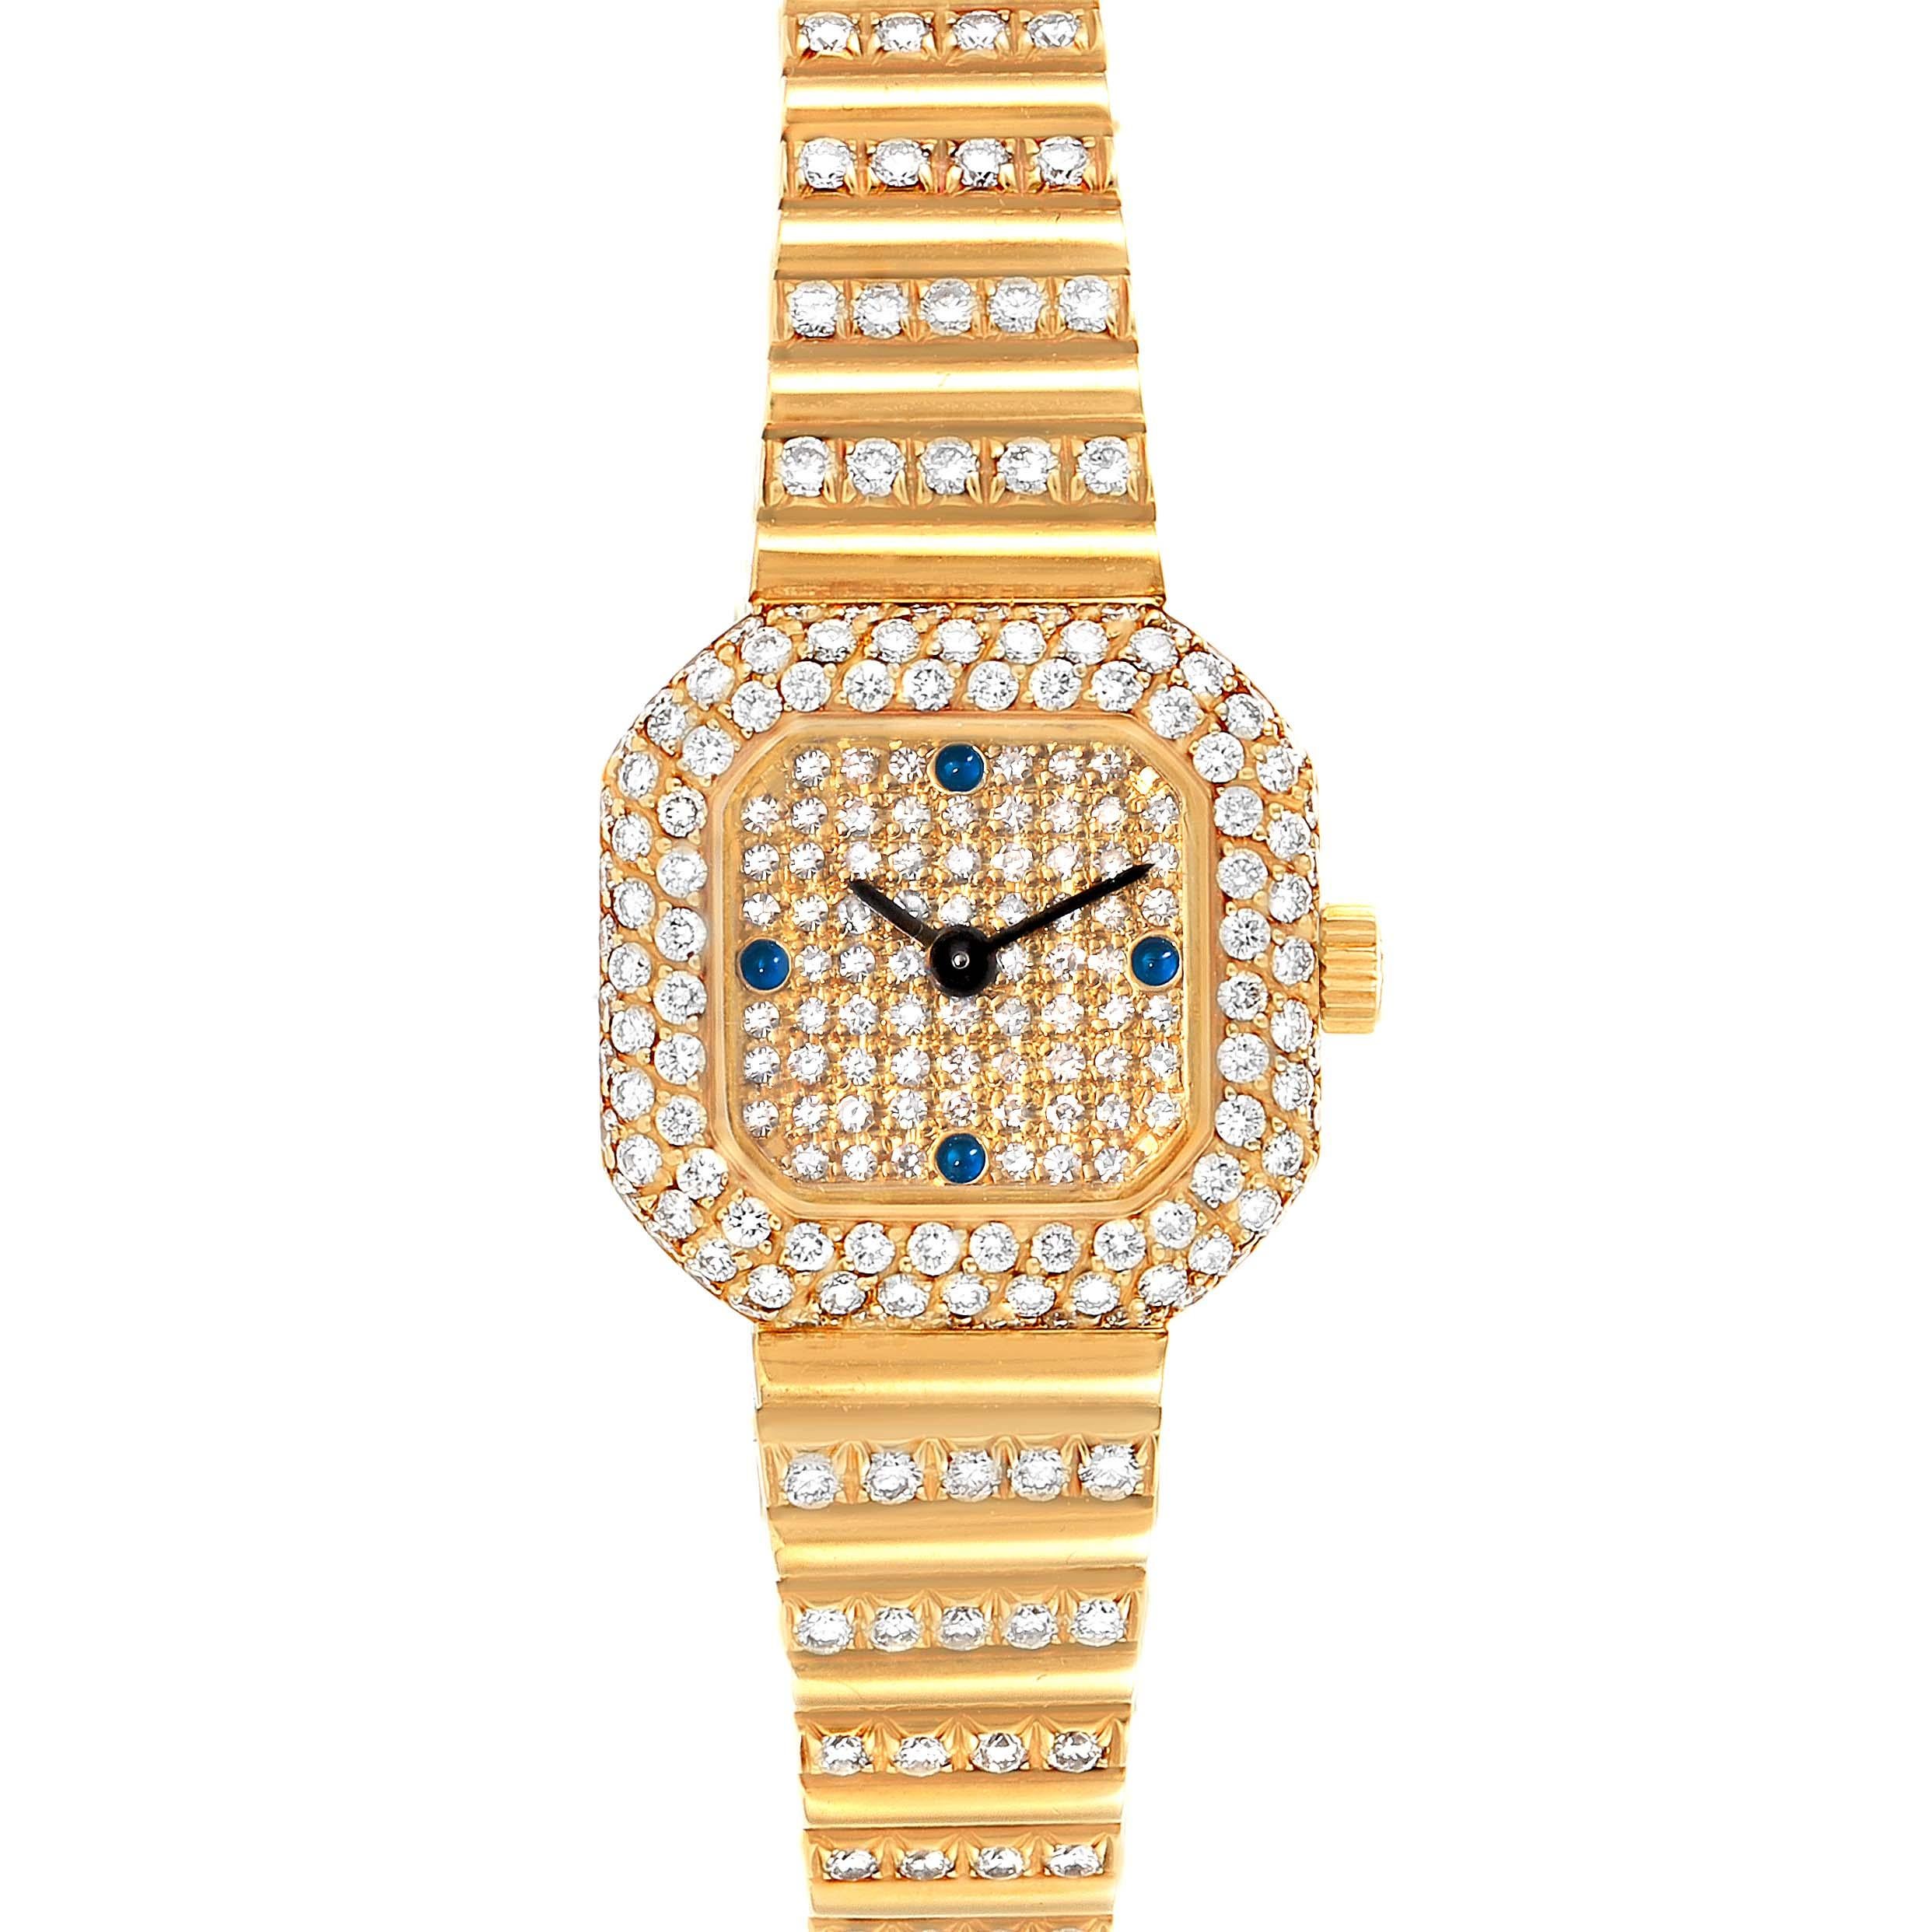 Patek Philippe 18K Yellow Gold Diamond Sapphire Cocktail Ladies Watch 4628. Manual winding movement. Caliber 16-250, rhodium-plated, fausses cotes decoration, 18 jewels, straight-line lever escapement, monometallic balance adjusted to heat, cold